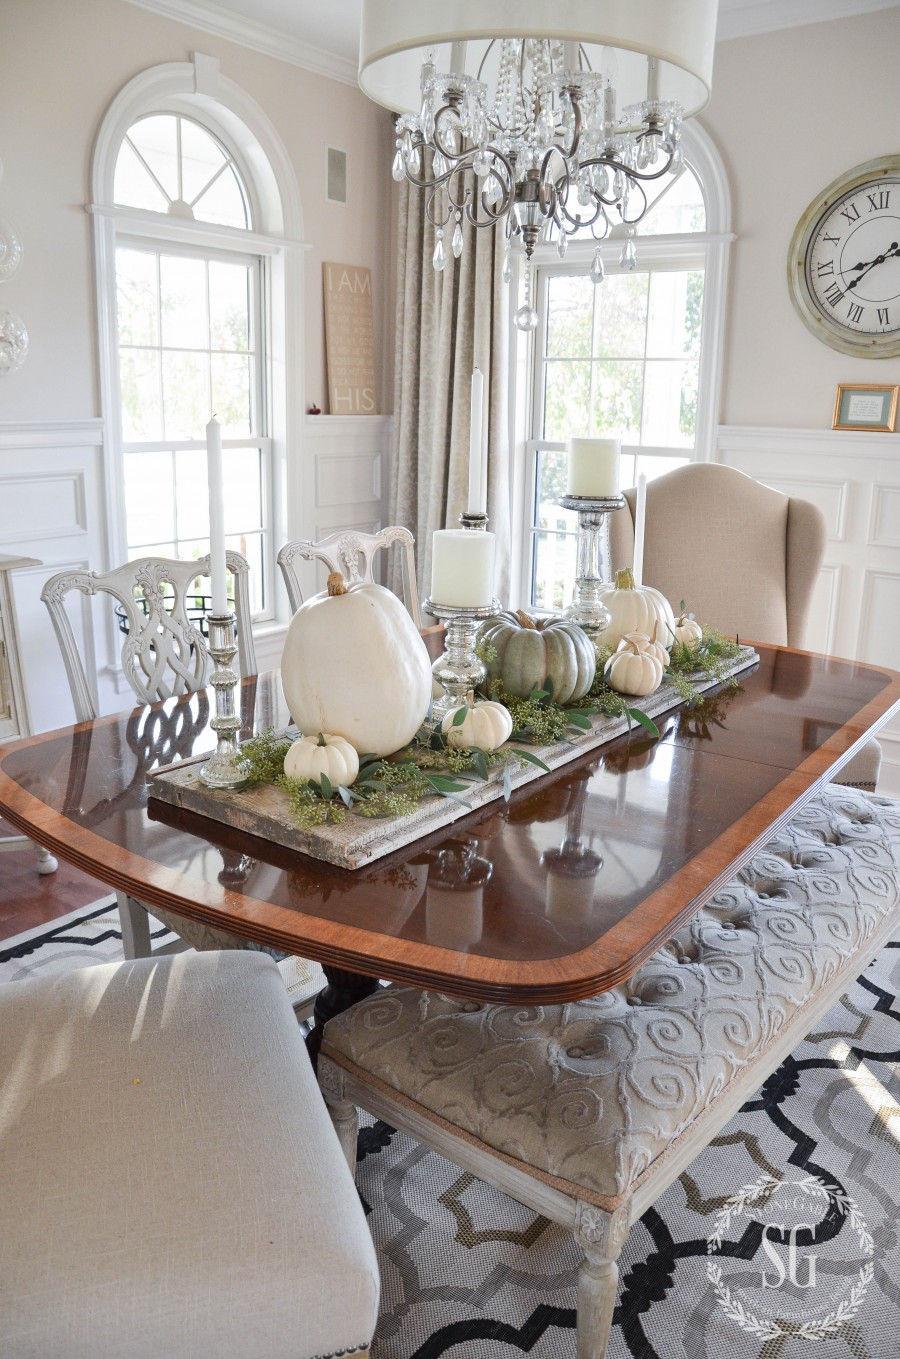 Simple Thanksgiving Table Decorations
 EASY PUMPKIN THANKSGIVING TABLE